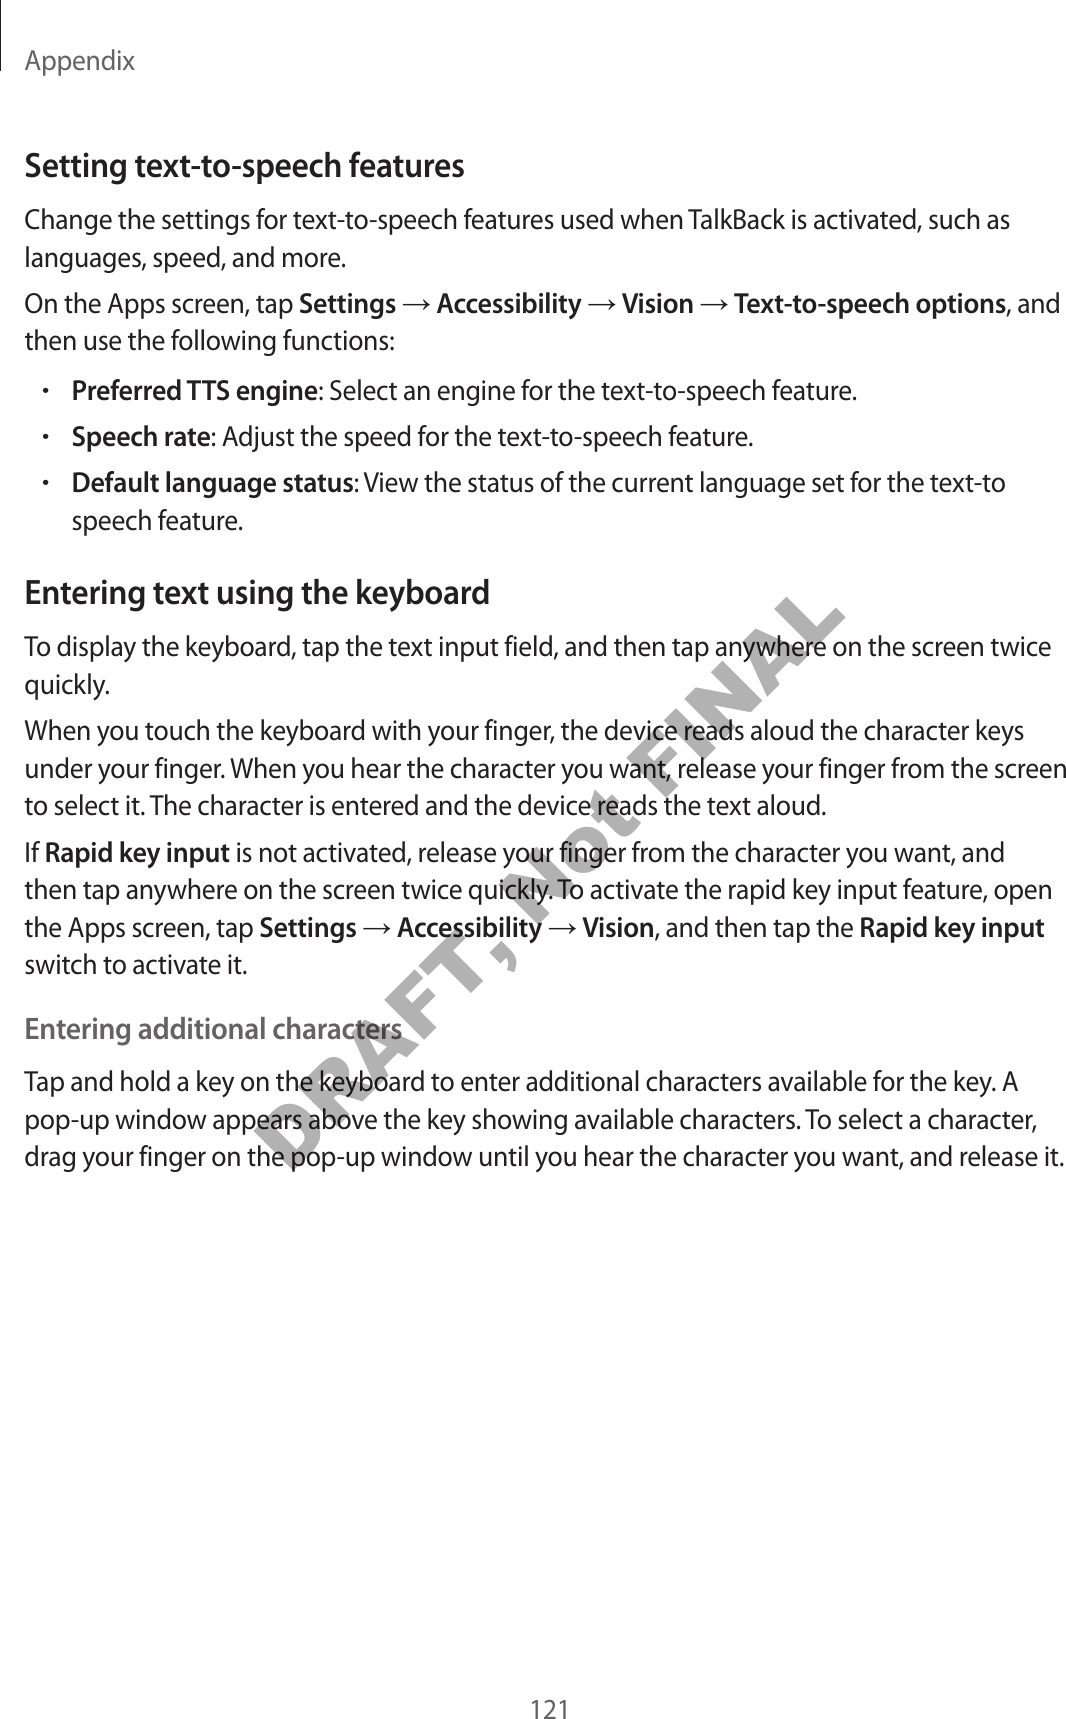 Appendix121Setting text-to-speech featuresChange the settings for text-to-speech features used when TalkBack is activated, such as languages, speed, and more.On the Apps screen, tap Settings ĺ Accessibility ĺ Vision ĺ Text-to-speech options, and then use the following functions:•Preferred TTS engine: Select an engine for the text-to-speech feature.•Speech rate: Adjust the speed for the text-to-speech feature.•Default language status: View the status of the current language set for the text-tospeech feature.Entering text using the keyboardTo display the keyboard, tap the text input field, and then tap anywhere on the screen twice quickly.When you touch the keyboard with your finger, the device reads aloud the character keys under your finger. When you hear the character you want, release your finger from the screen to select it. The character is entered and the device reads the text aloud.If Rapid key input is not activated, release your finger from the character you want, and then tap anywhere on the screen twice quickly. To activate the rapid key input feature, open the Apps screen, tap Settings ĺ Accessibility ĺ Vision, and then tap the Rapid key input switch to activate it.Entering additional charactersTap and hold a key on the keyboard to enter additional characters available for the key. A pop-up window appears above the key showing available characters. To select a character, drag your finger on the pop-up window until you hear the character you want, and release it.DRAFT, Not FINAL